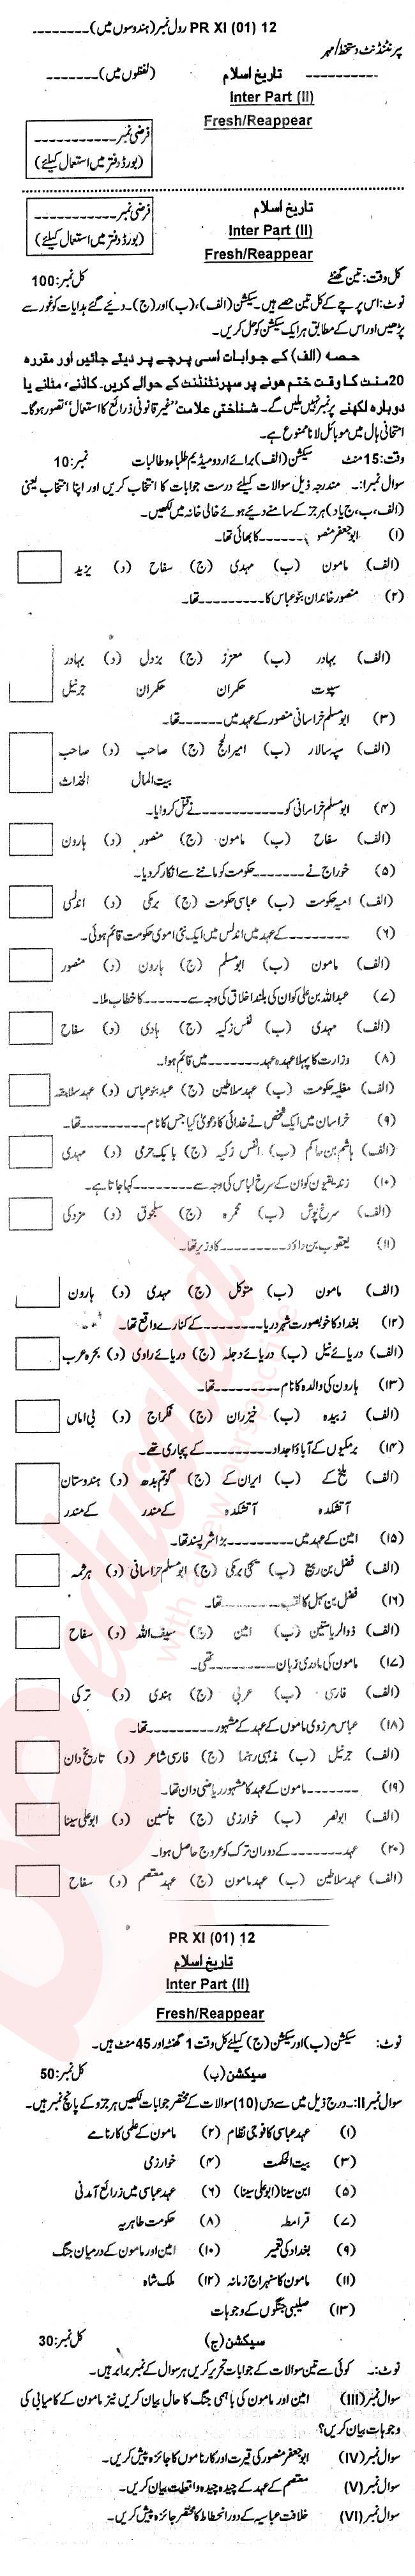 Islamic History FA Part 2 Past Paper Group 1 BISE Bannu 2012